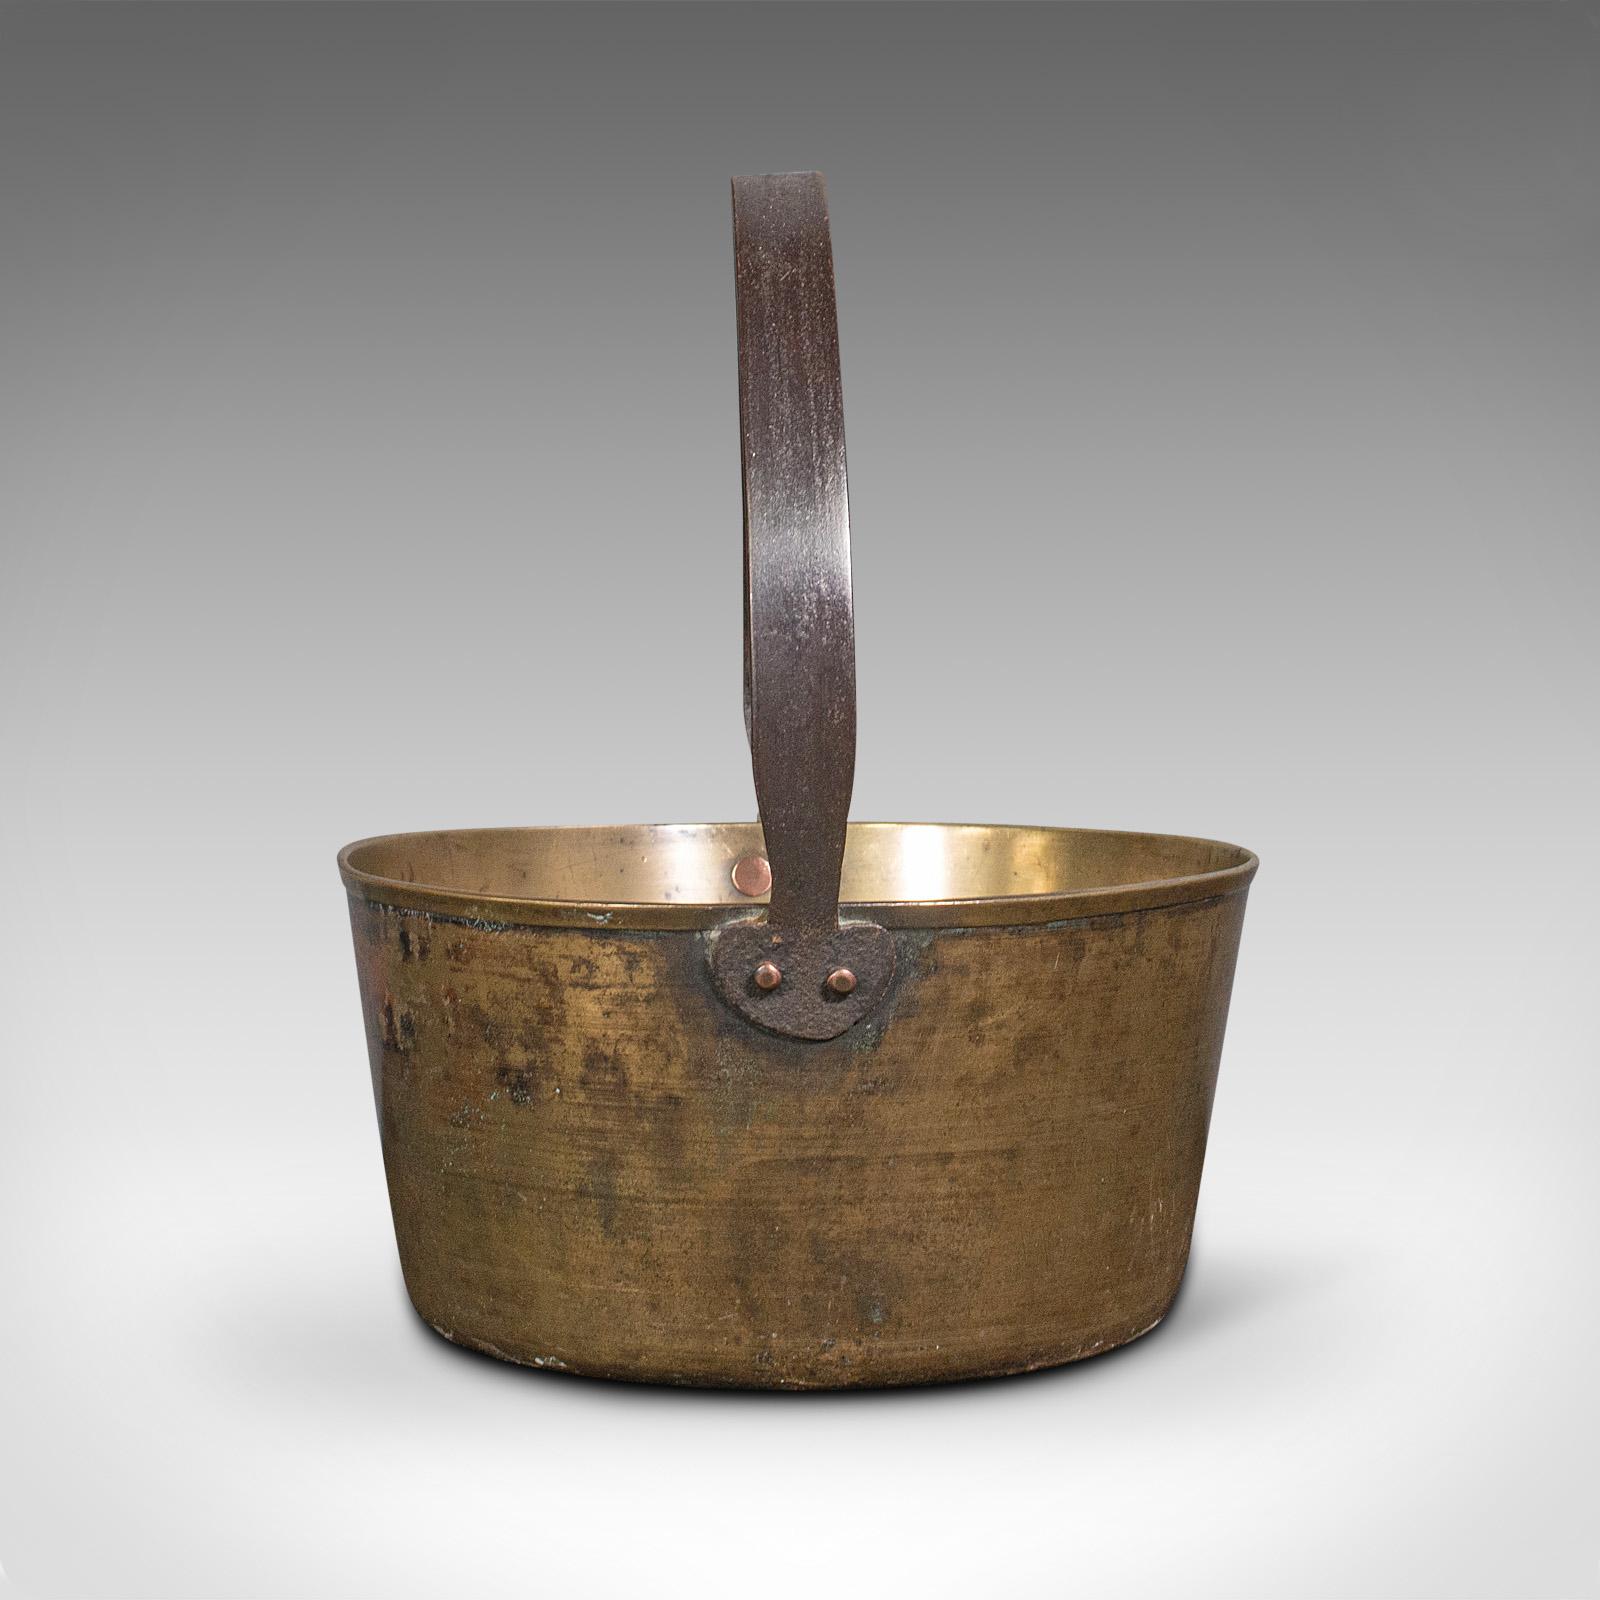 Antique Preserving Pan, English, Bronze, Jam, Cooking Pot, Georgian, Circa 1800 In Good Condition For Sale In Hele, Devon, GB